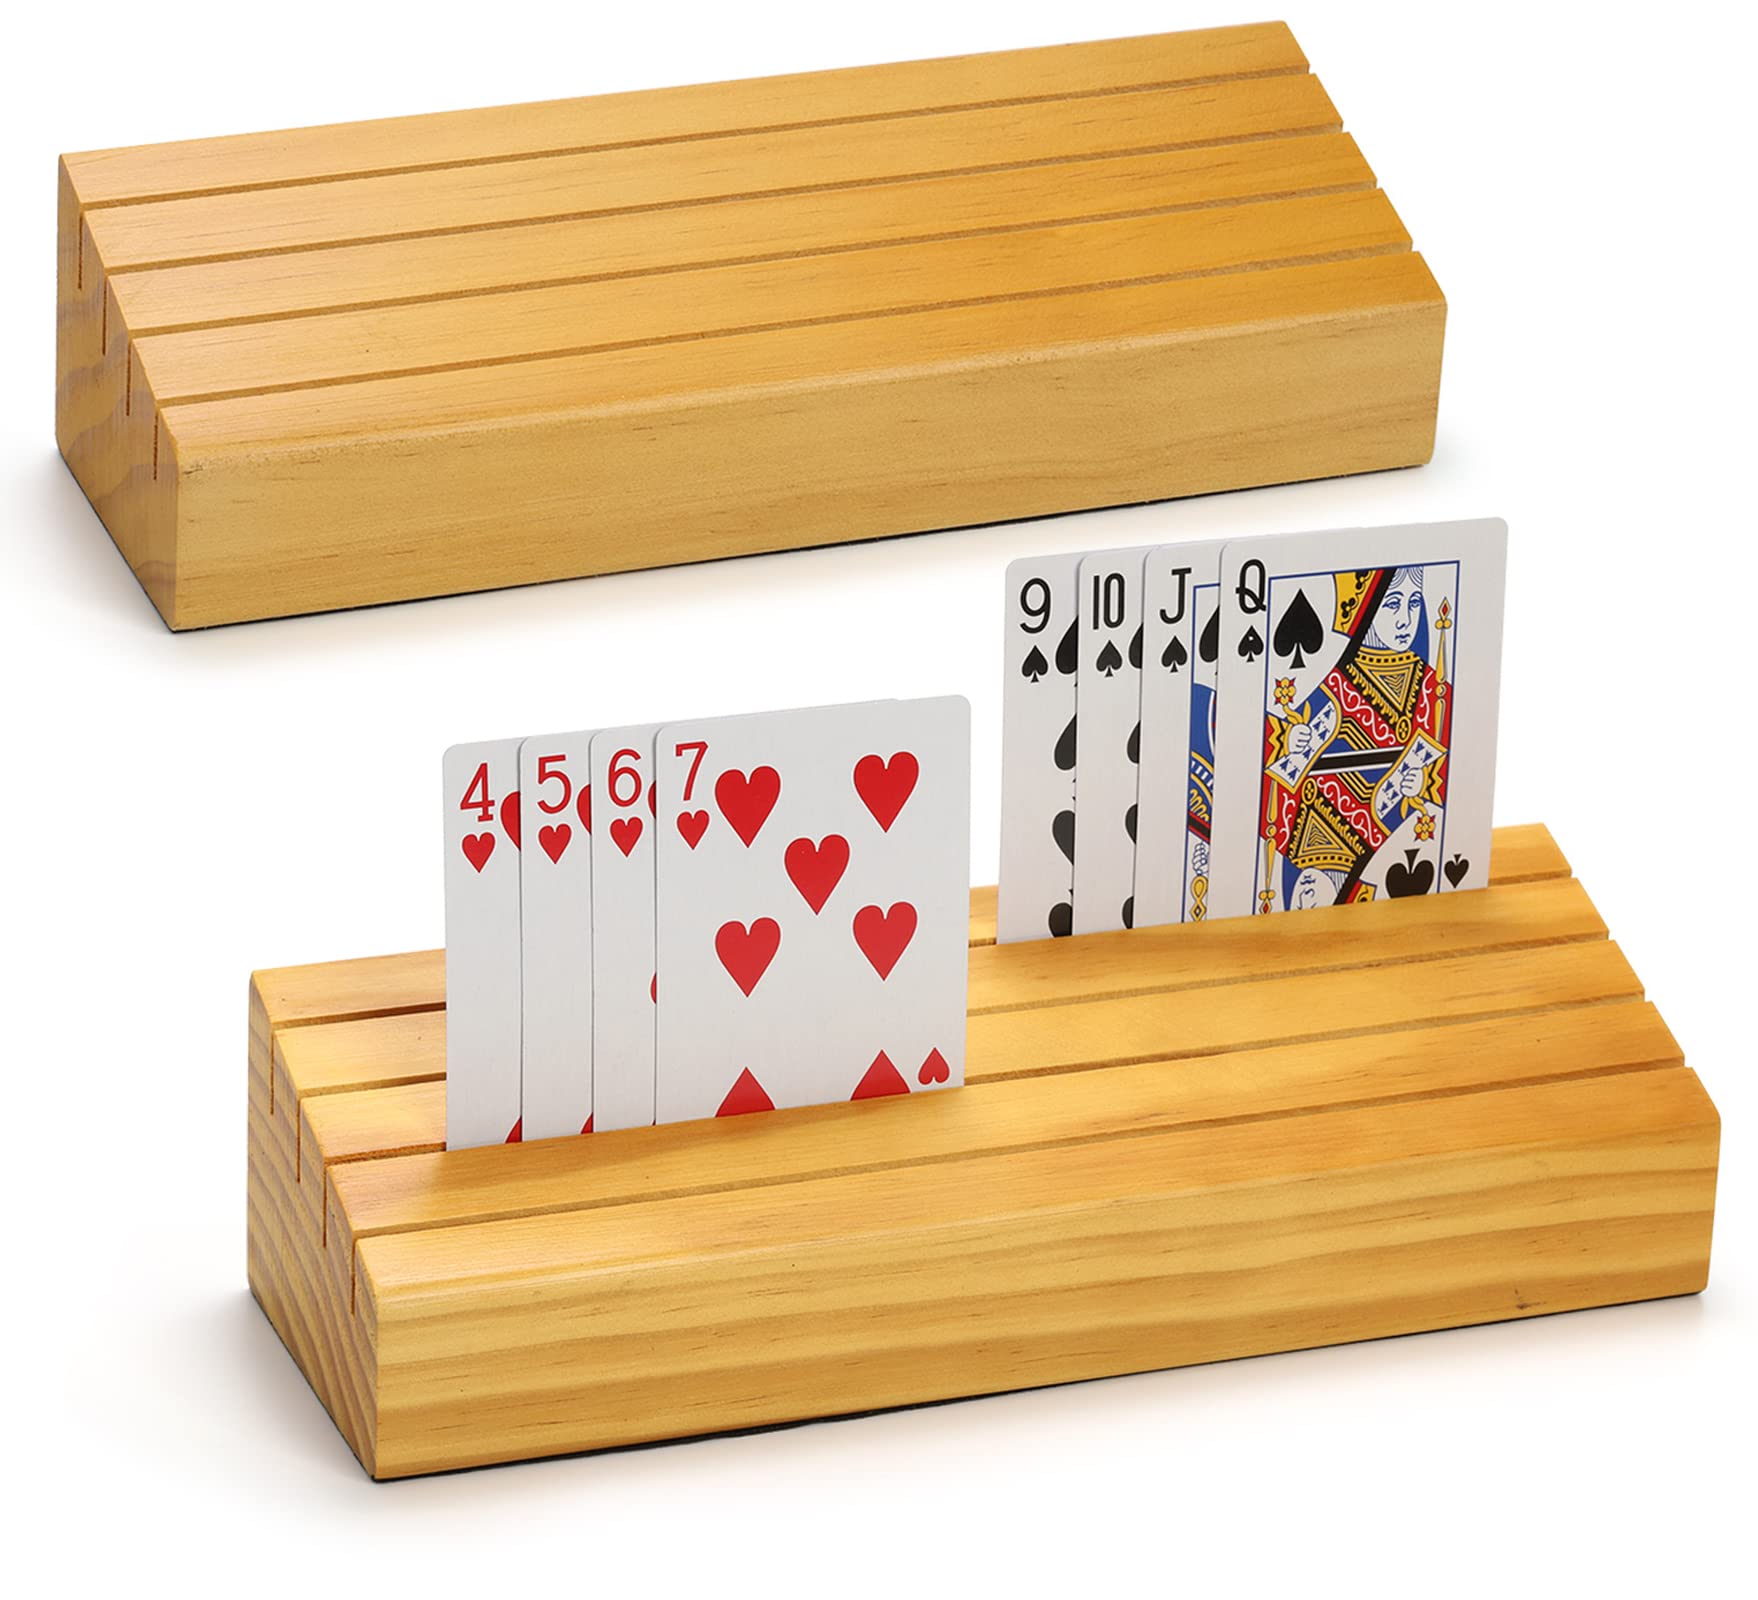 Yesland 2 Pack Wood Card Holders for Playing Cards, Pine Orange Playing Card Tray Racks for Adults Seniors Kids Bridge Strategy Card Playing, 10 X 3.4 X 2.5 Inches